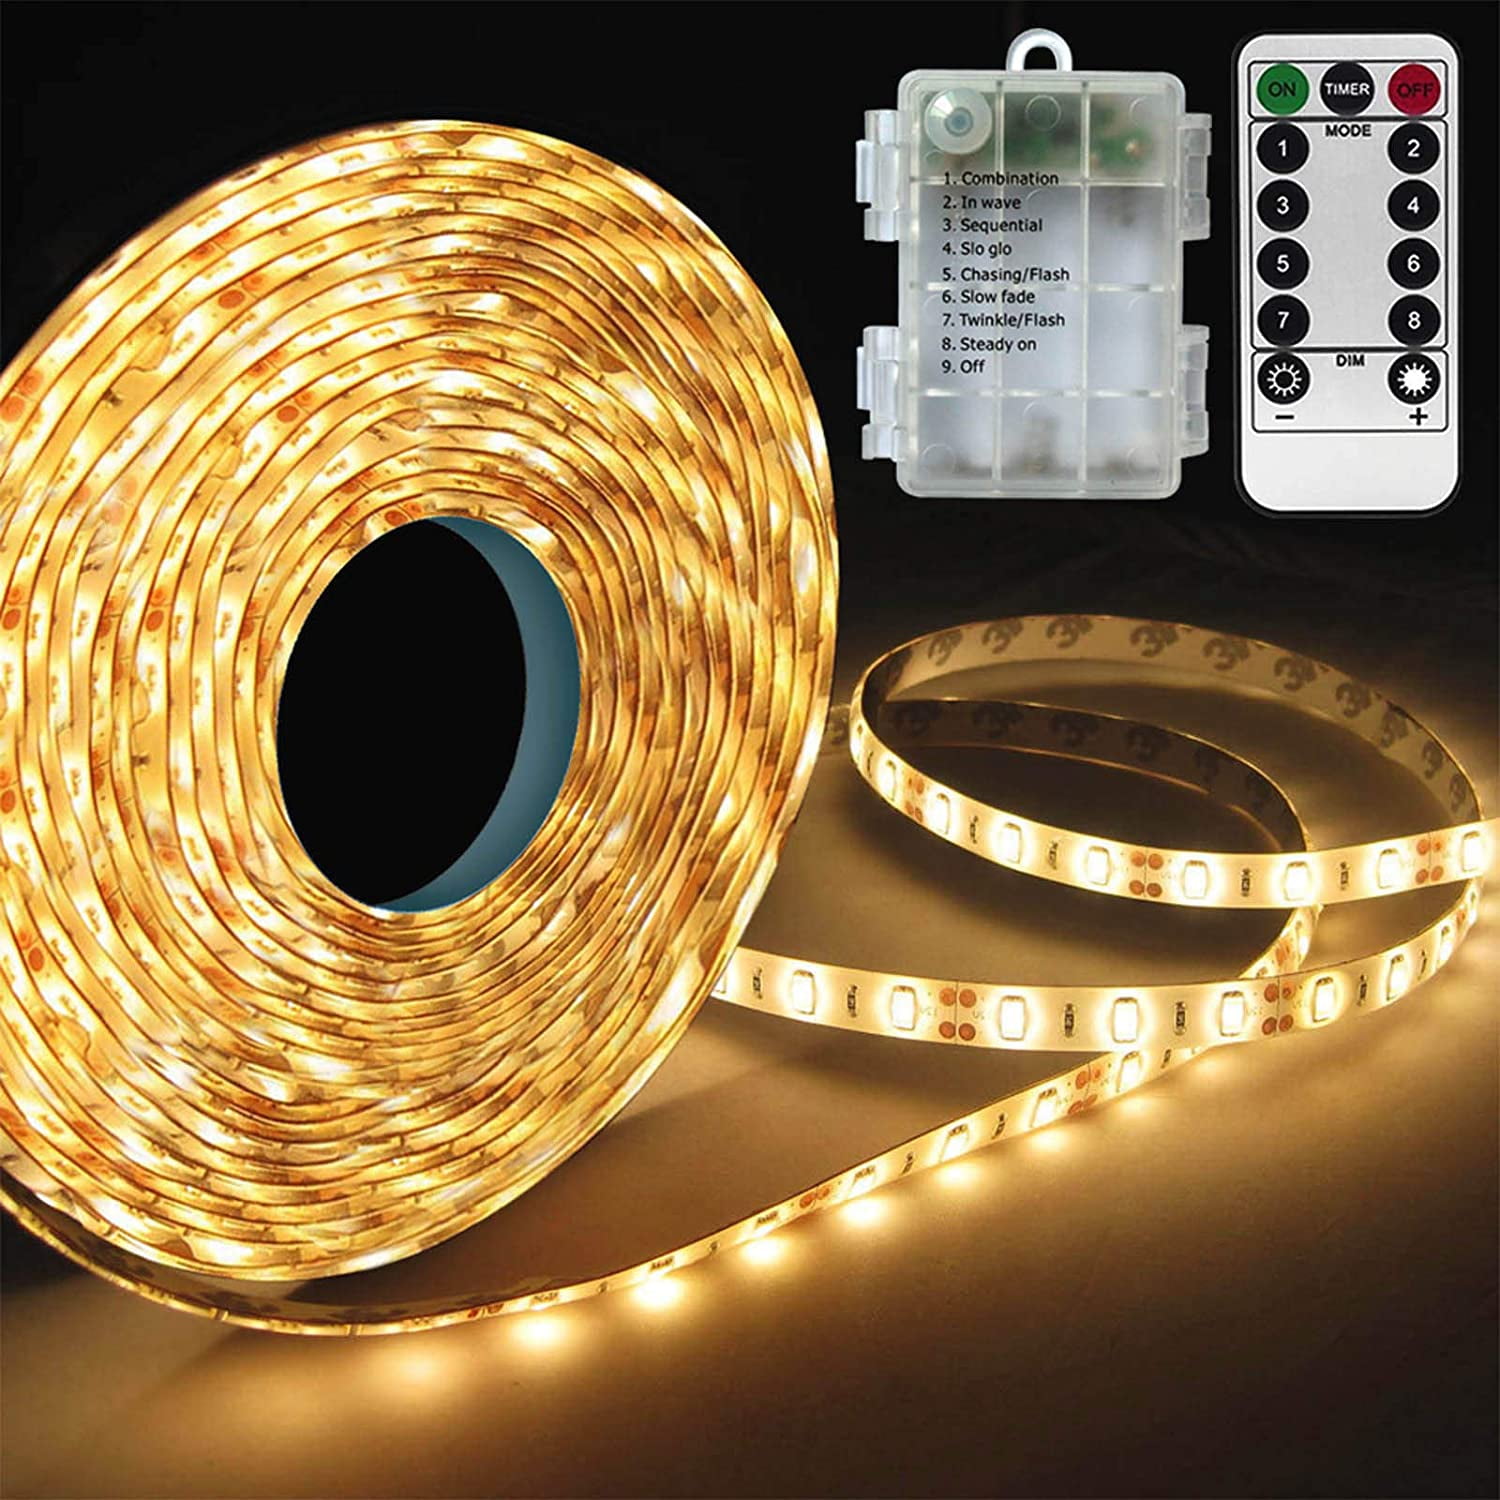 Battery Powered Led Strip Lights with Remote Cuttable 8 Modes Timer Self-Adhesive Waterproof Warm White 3000K Dimmable 3M 90Led Strip Lights for TV Kitchen Cupboard Bedroom Decor 